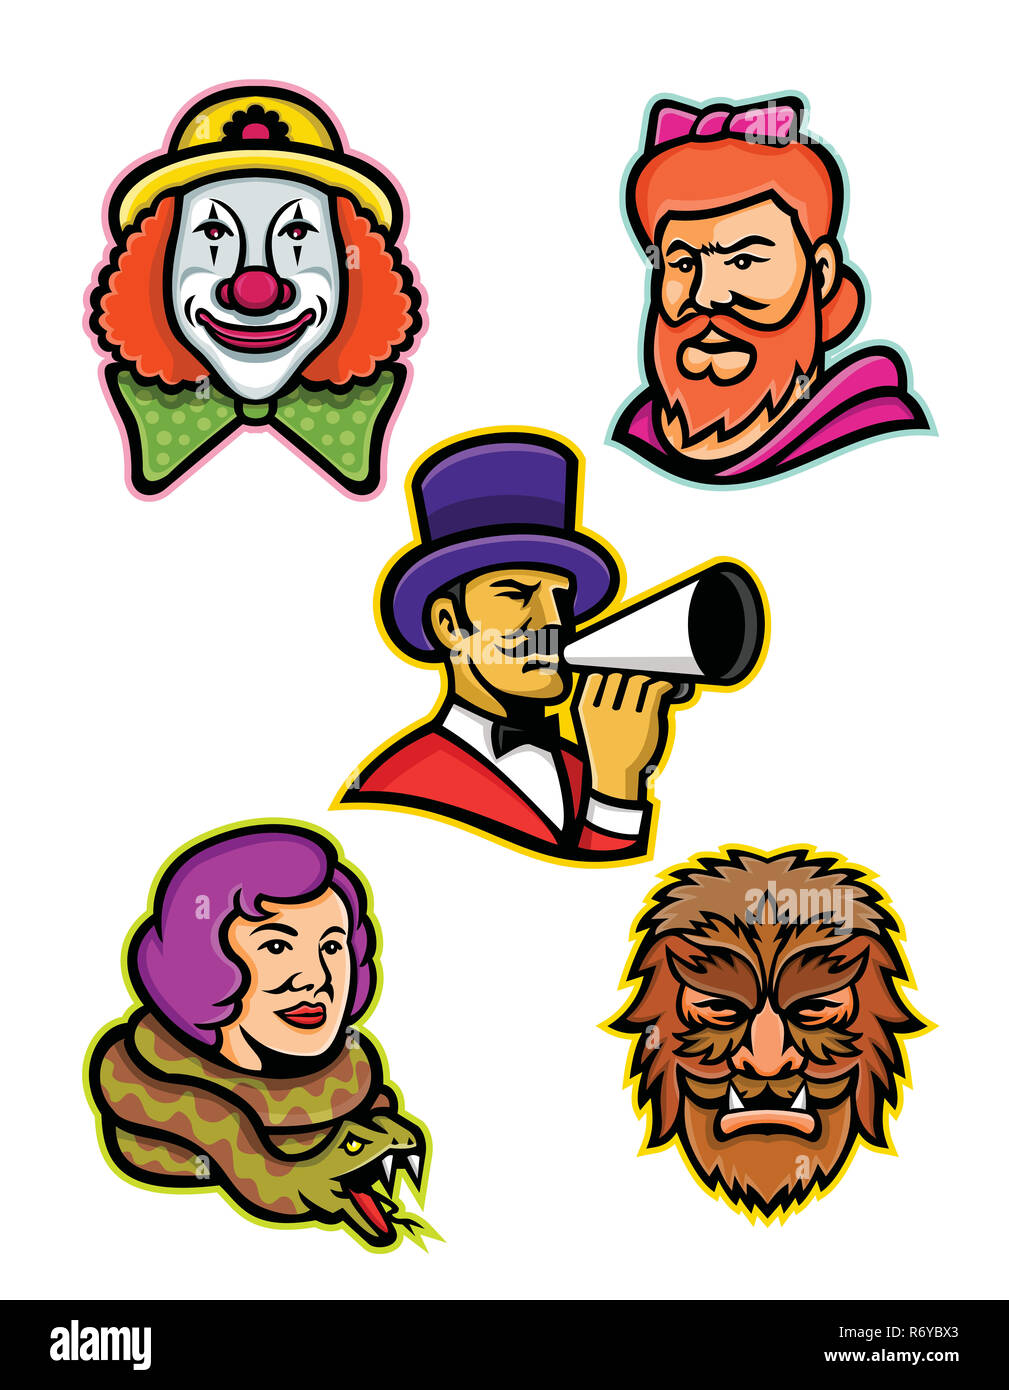 Circus Performers and Freaks Mascot Collection Stock Photo